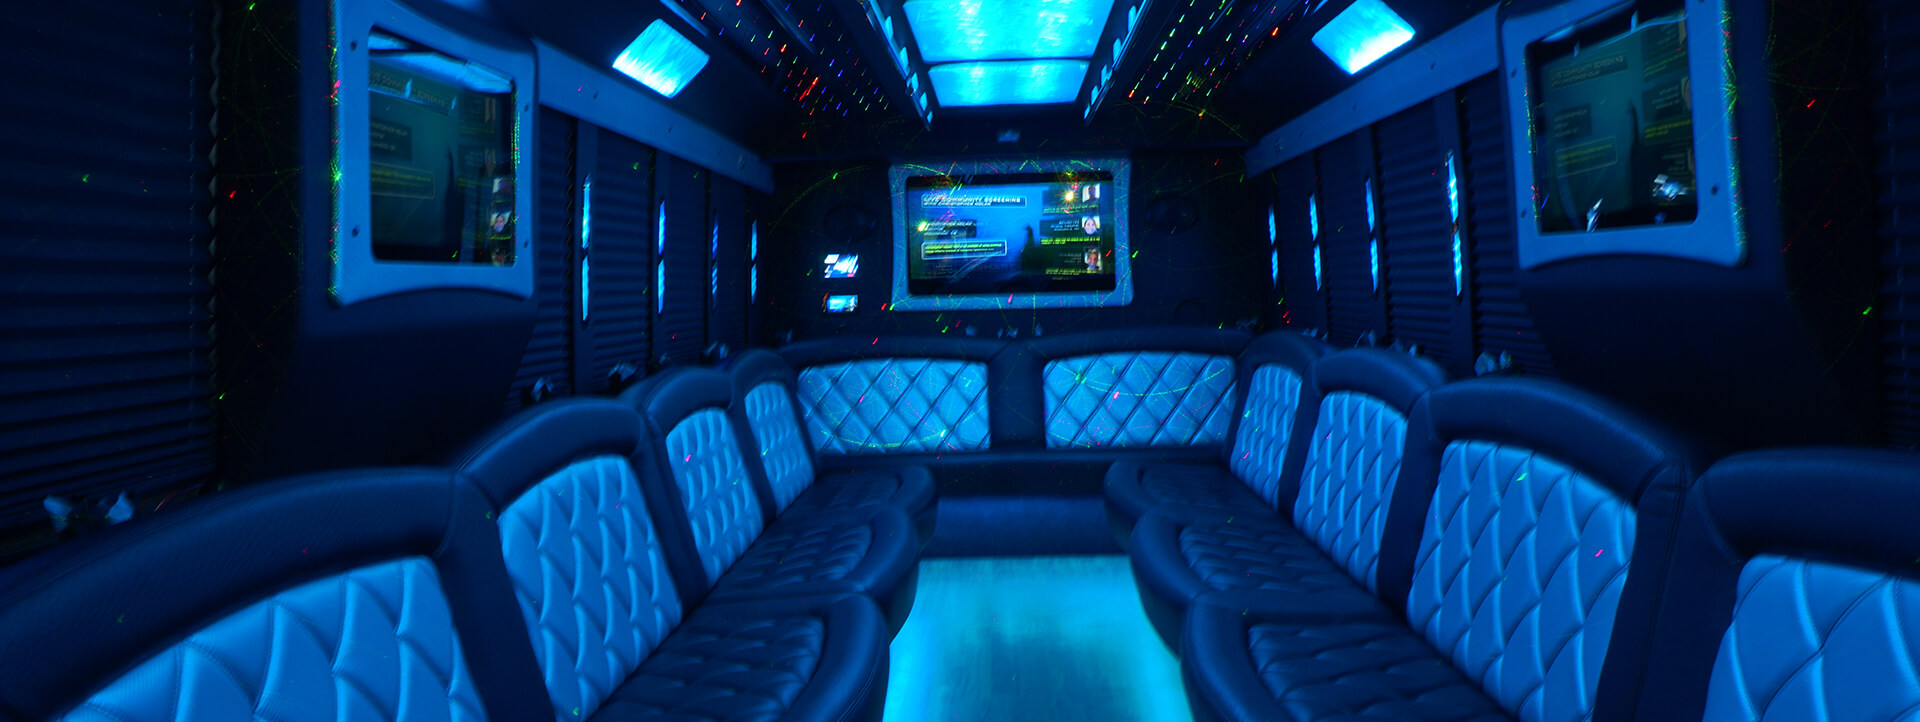 limousine bus interior with blue lights